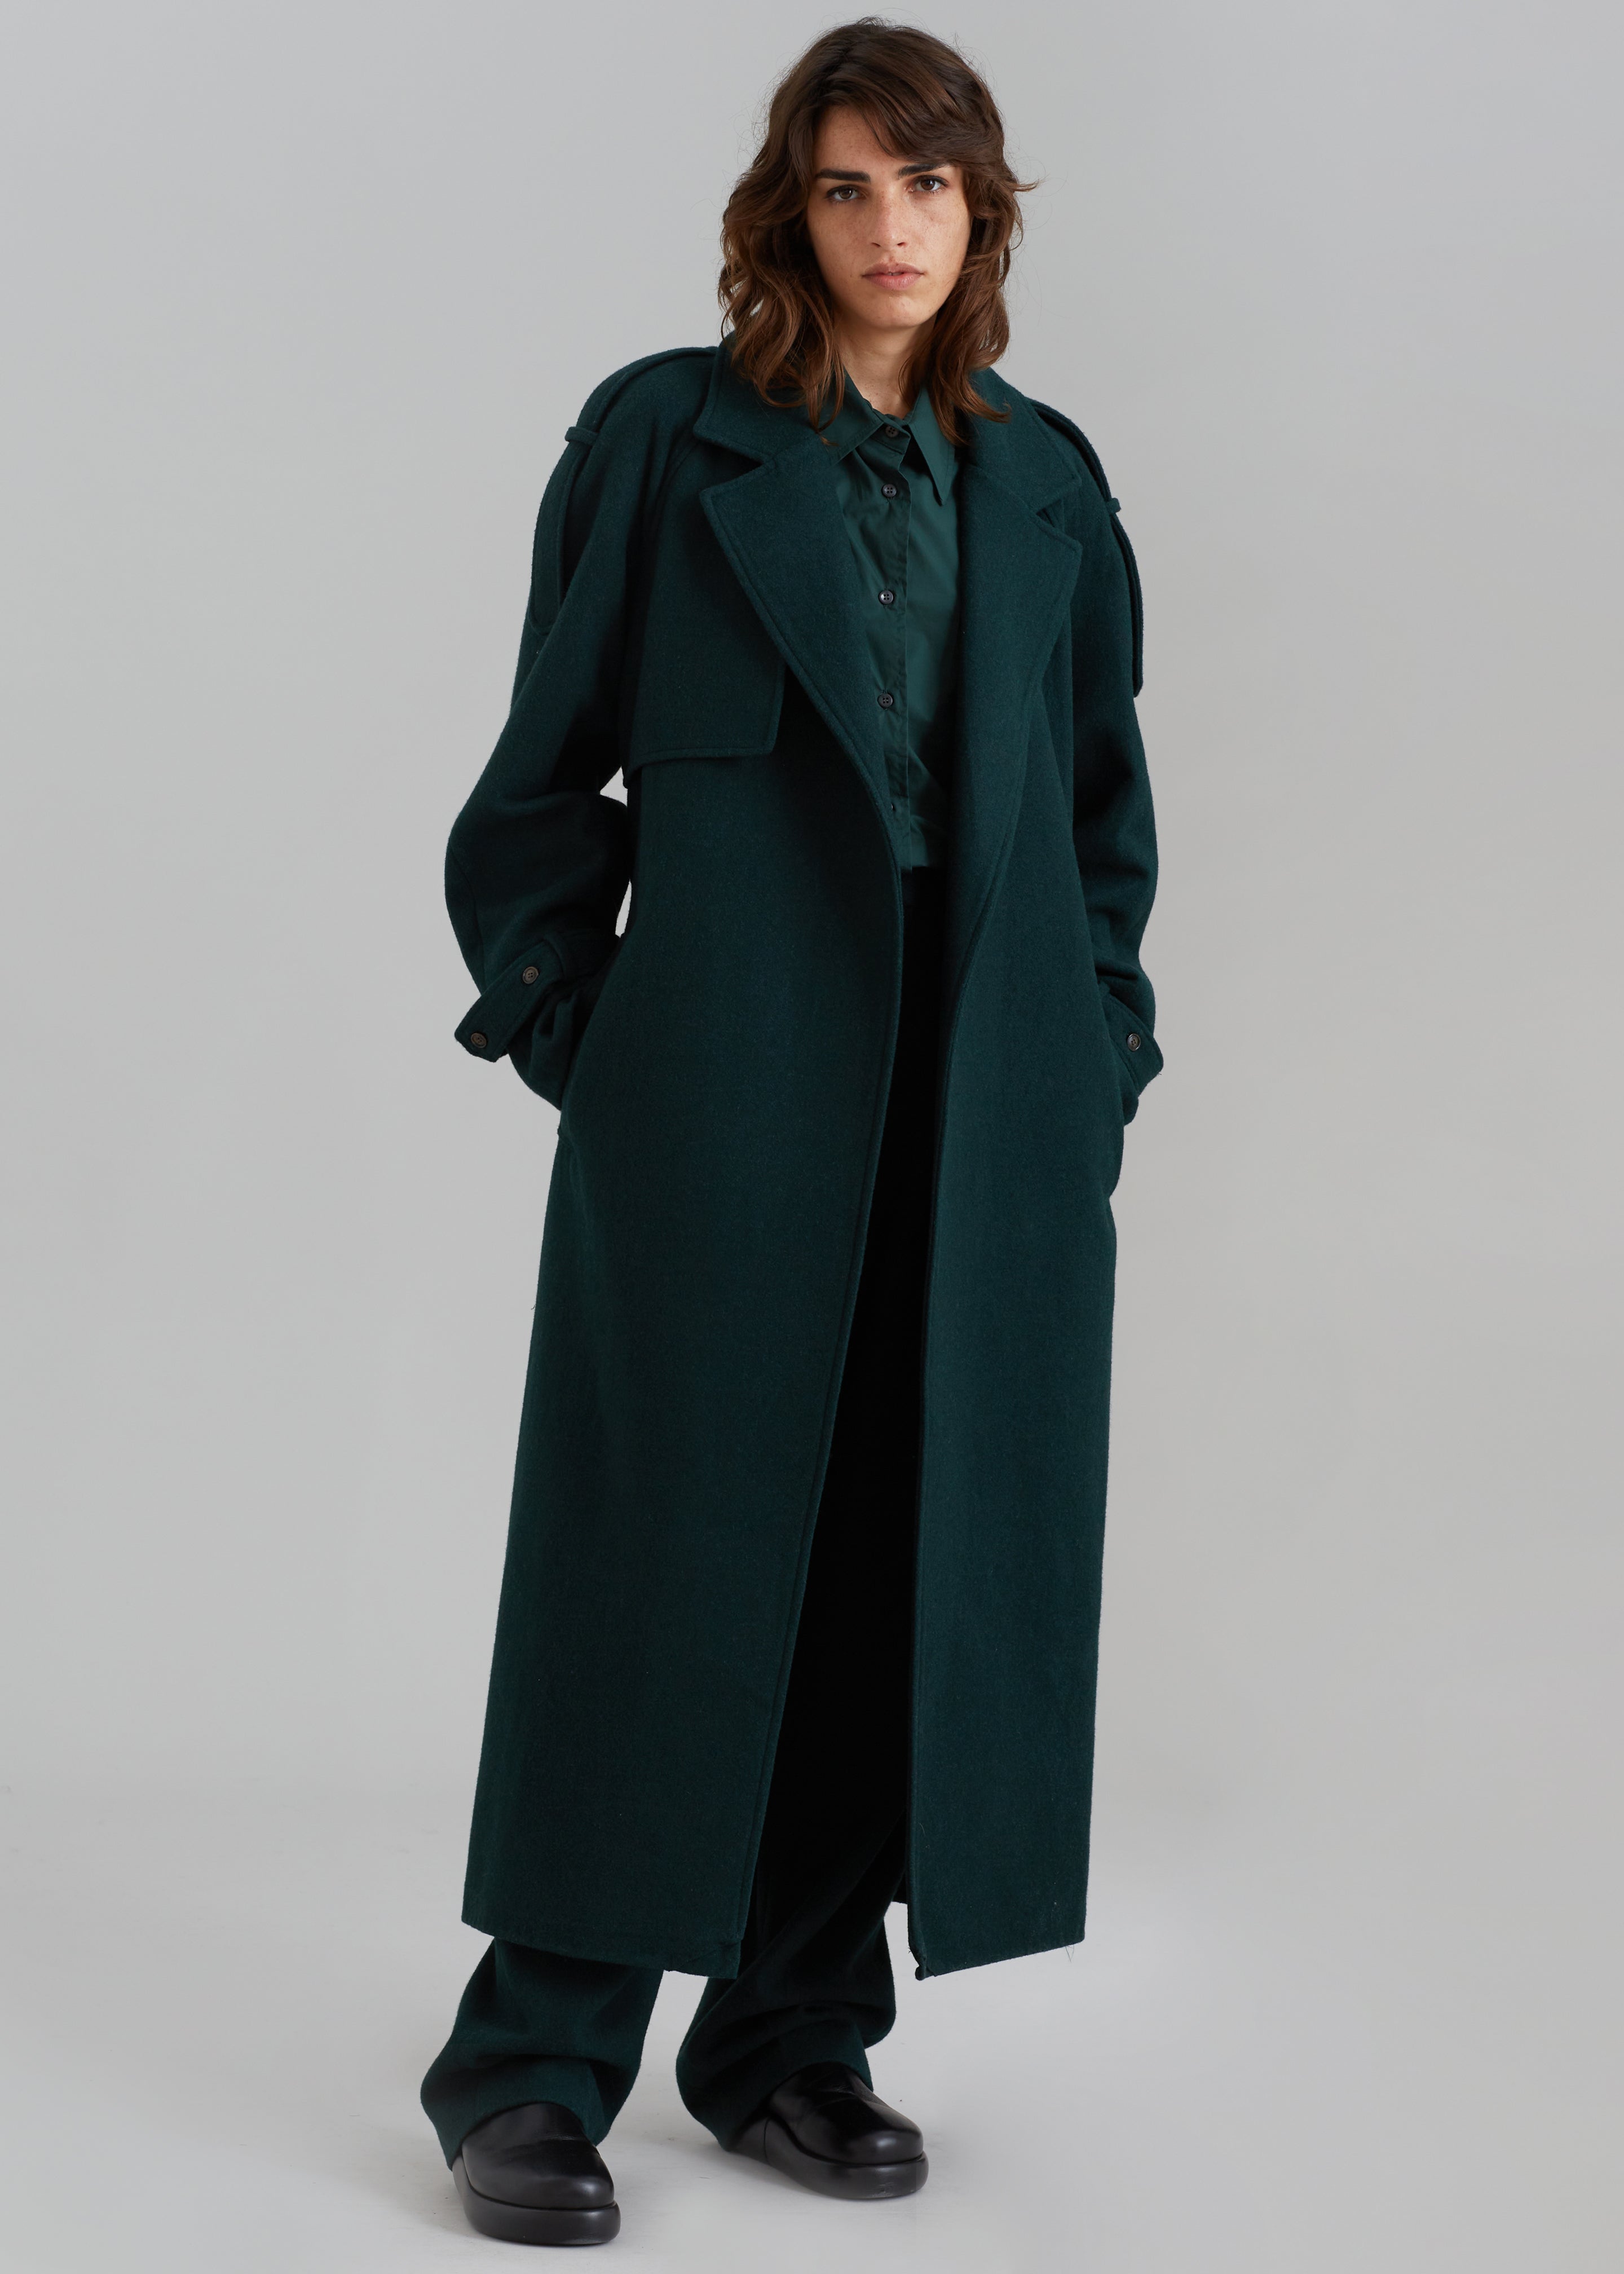 Suzanne Wool Trench Coat - Bottle Green - 8